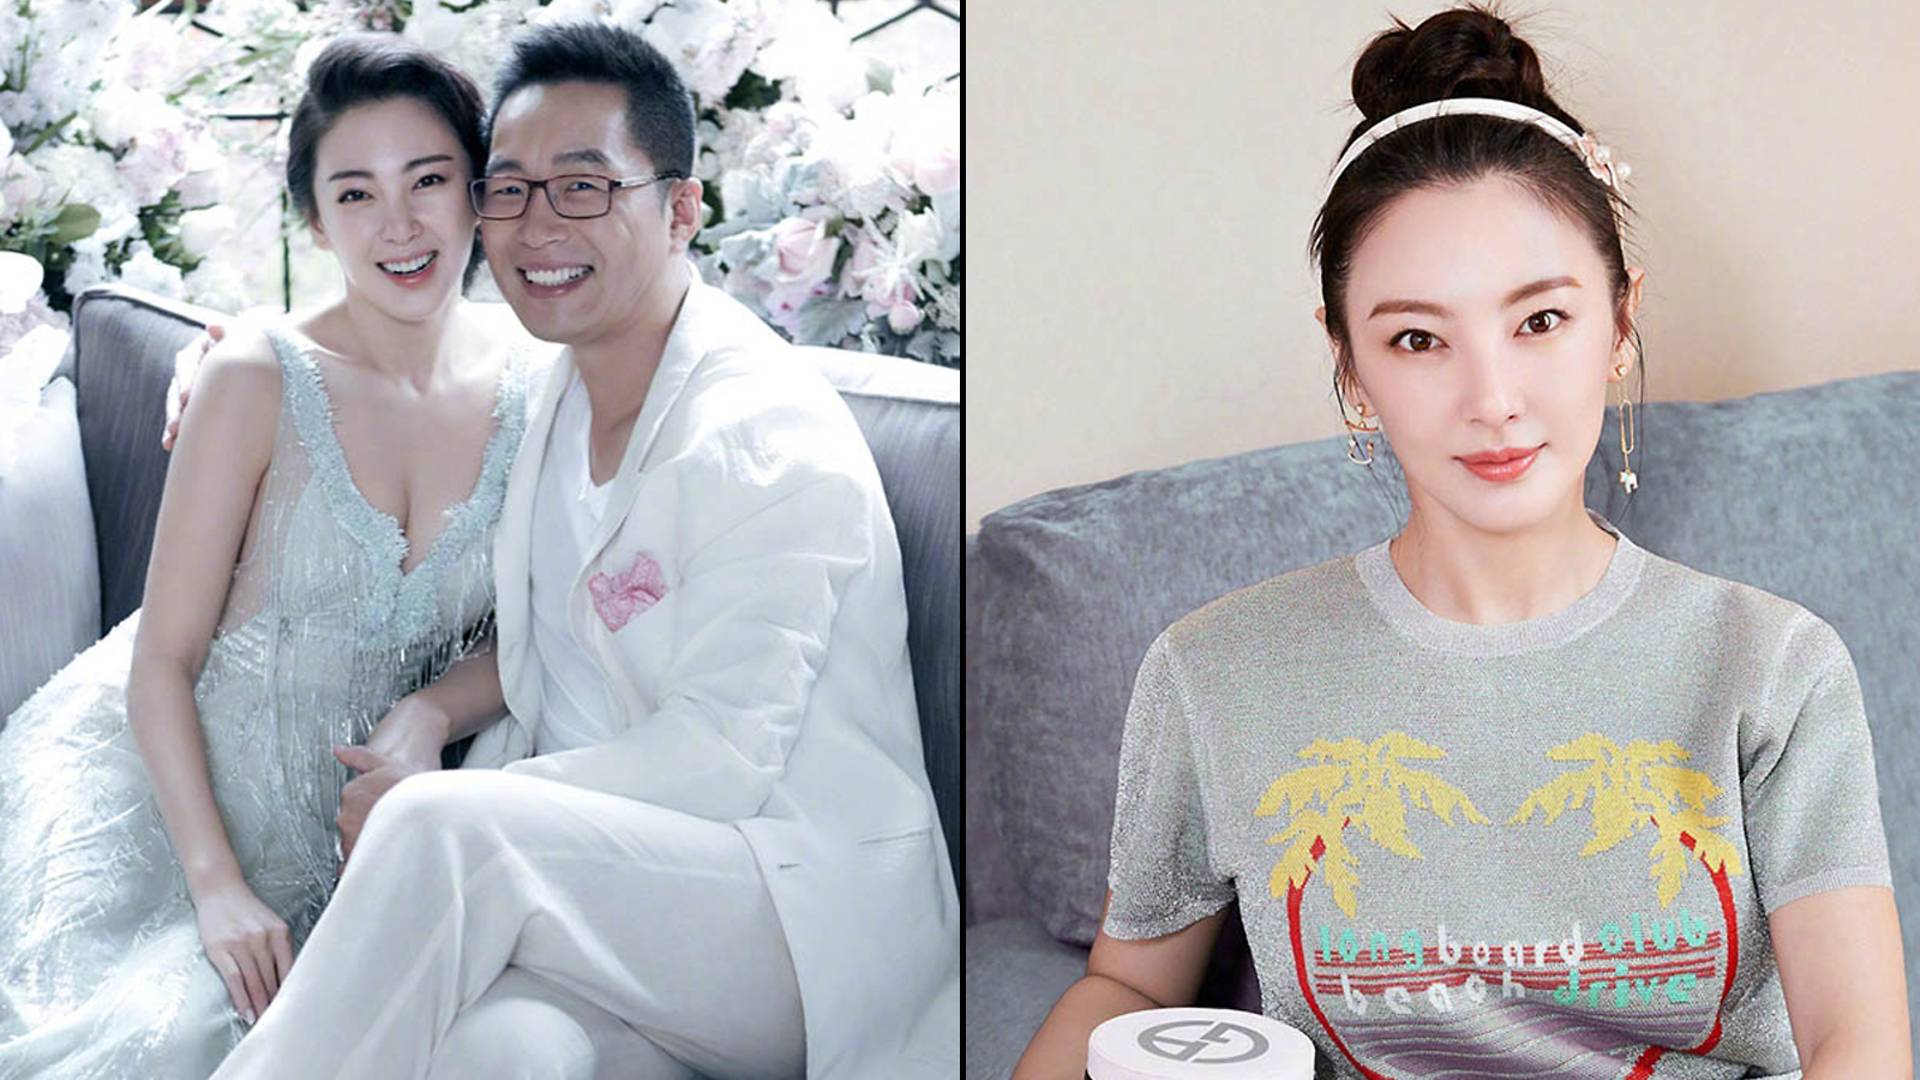 Kitty Zhang's dispute with husband allegedly turned violent - 8days